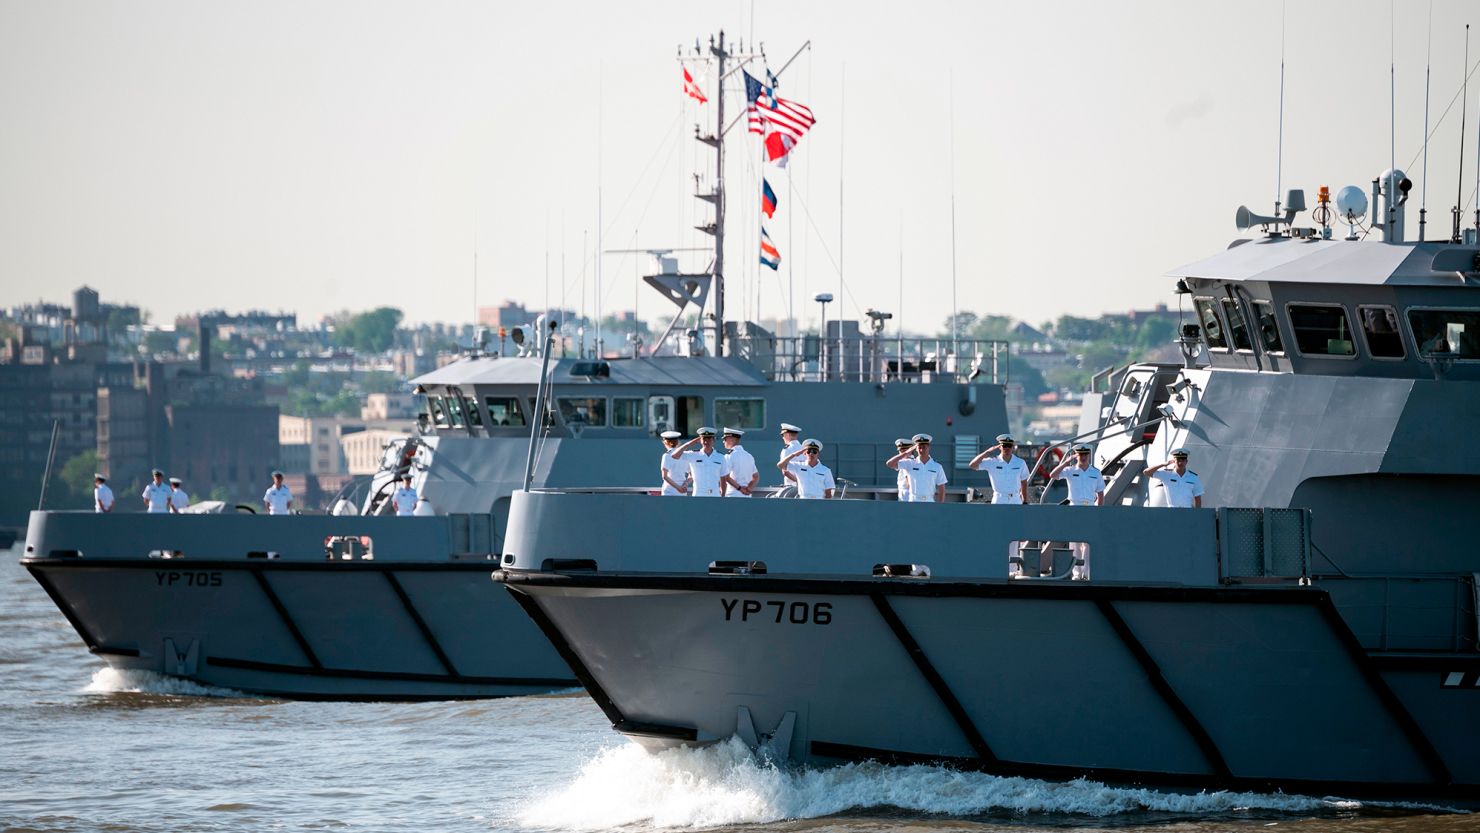 Two US Navy training vessels take part in the parade for Fleet Week 2019, on May 22, 2019 in New York.